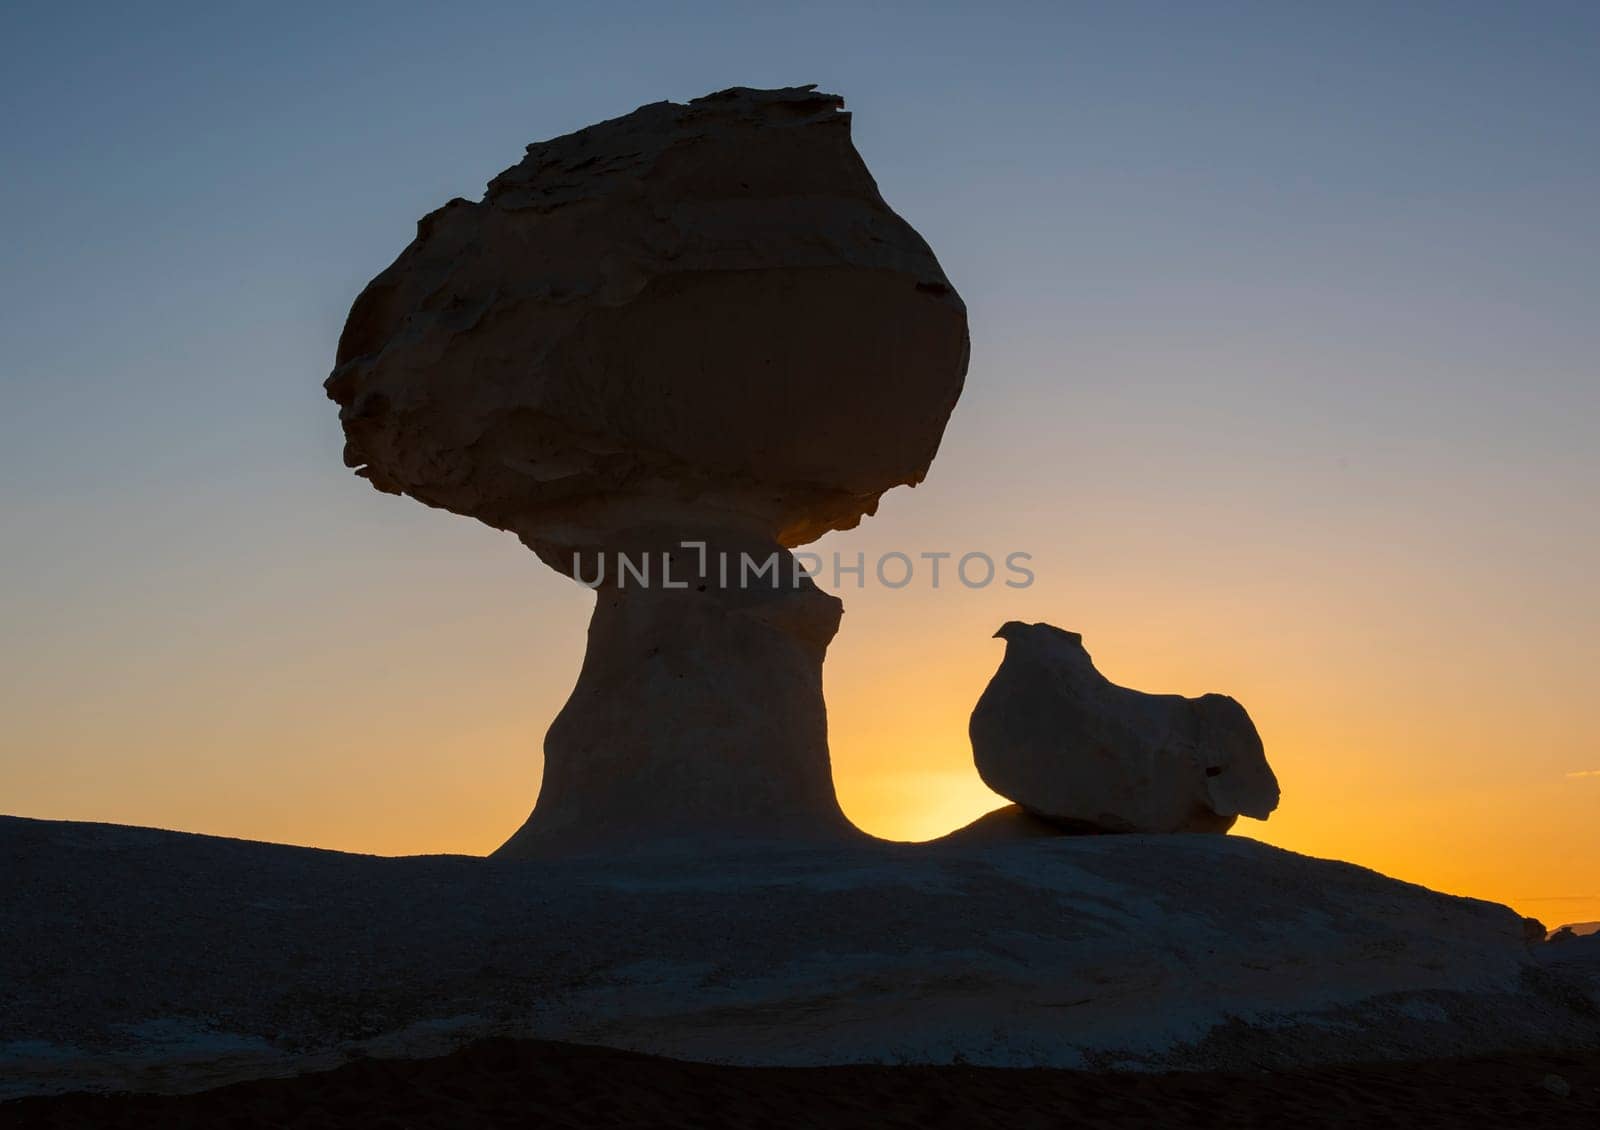 Landscape scenic view of desolate barren western desert in Panoramic barren landscape in Egypt Western White desert with silhouette of chicken and mushroom geological rock formations